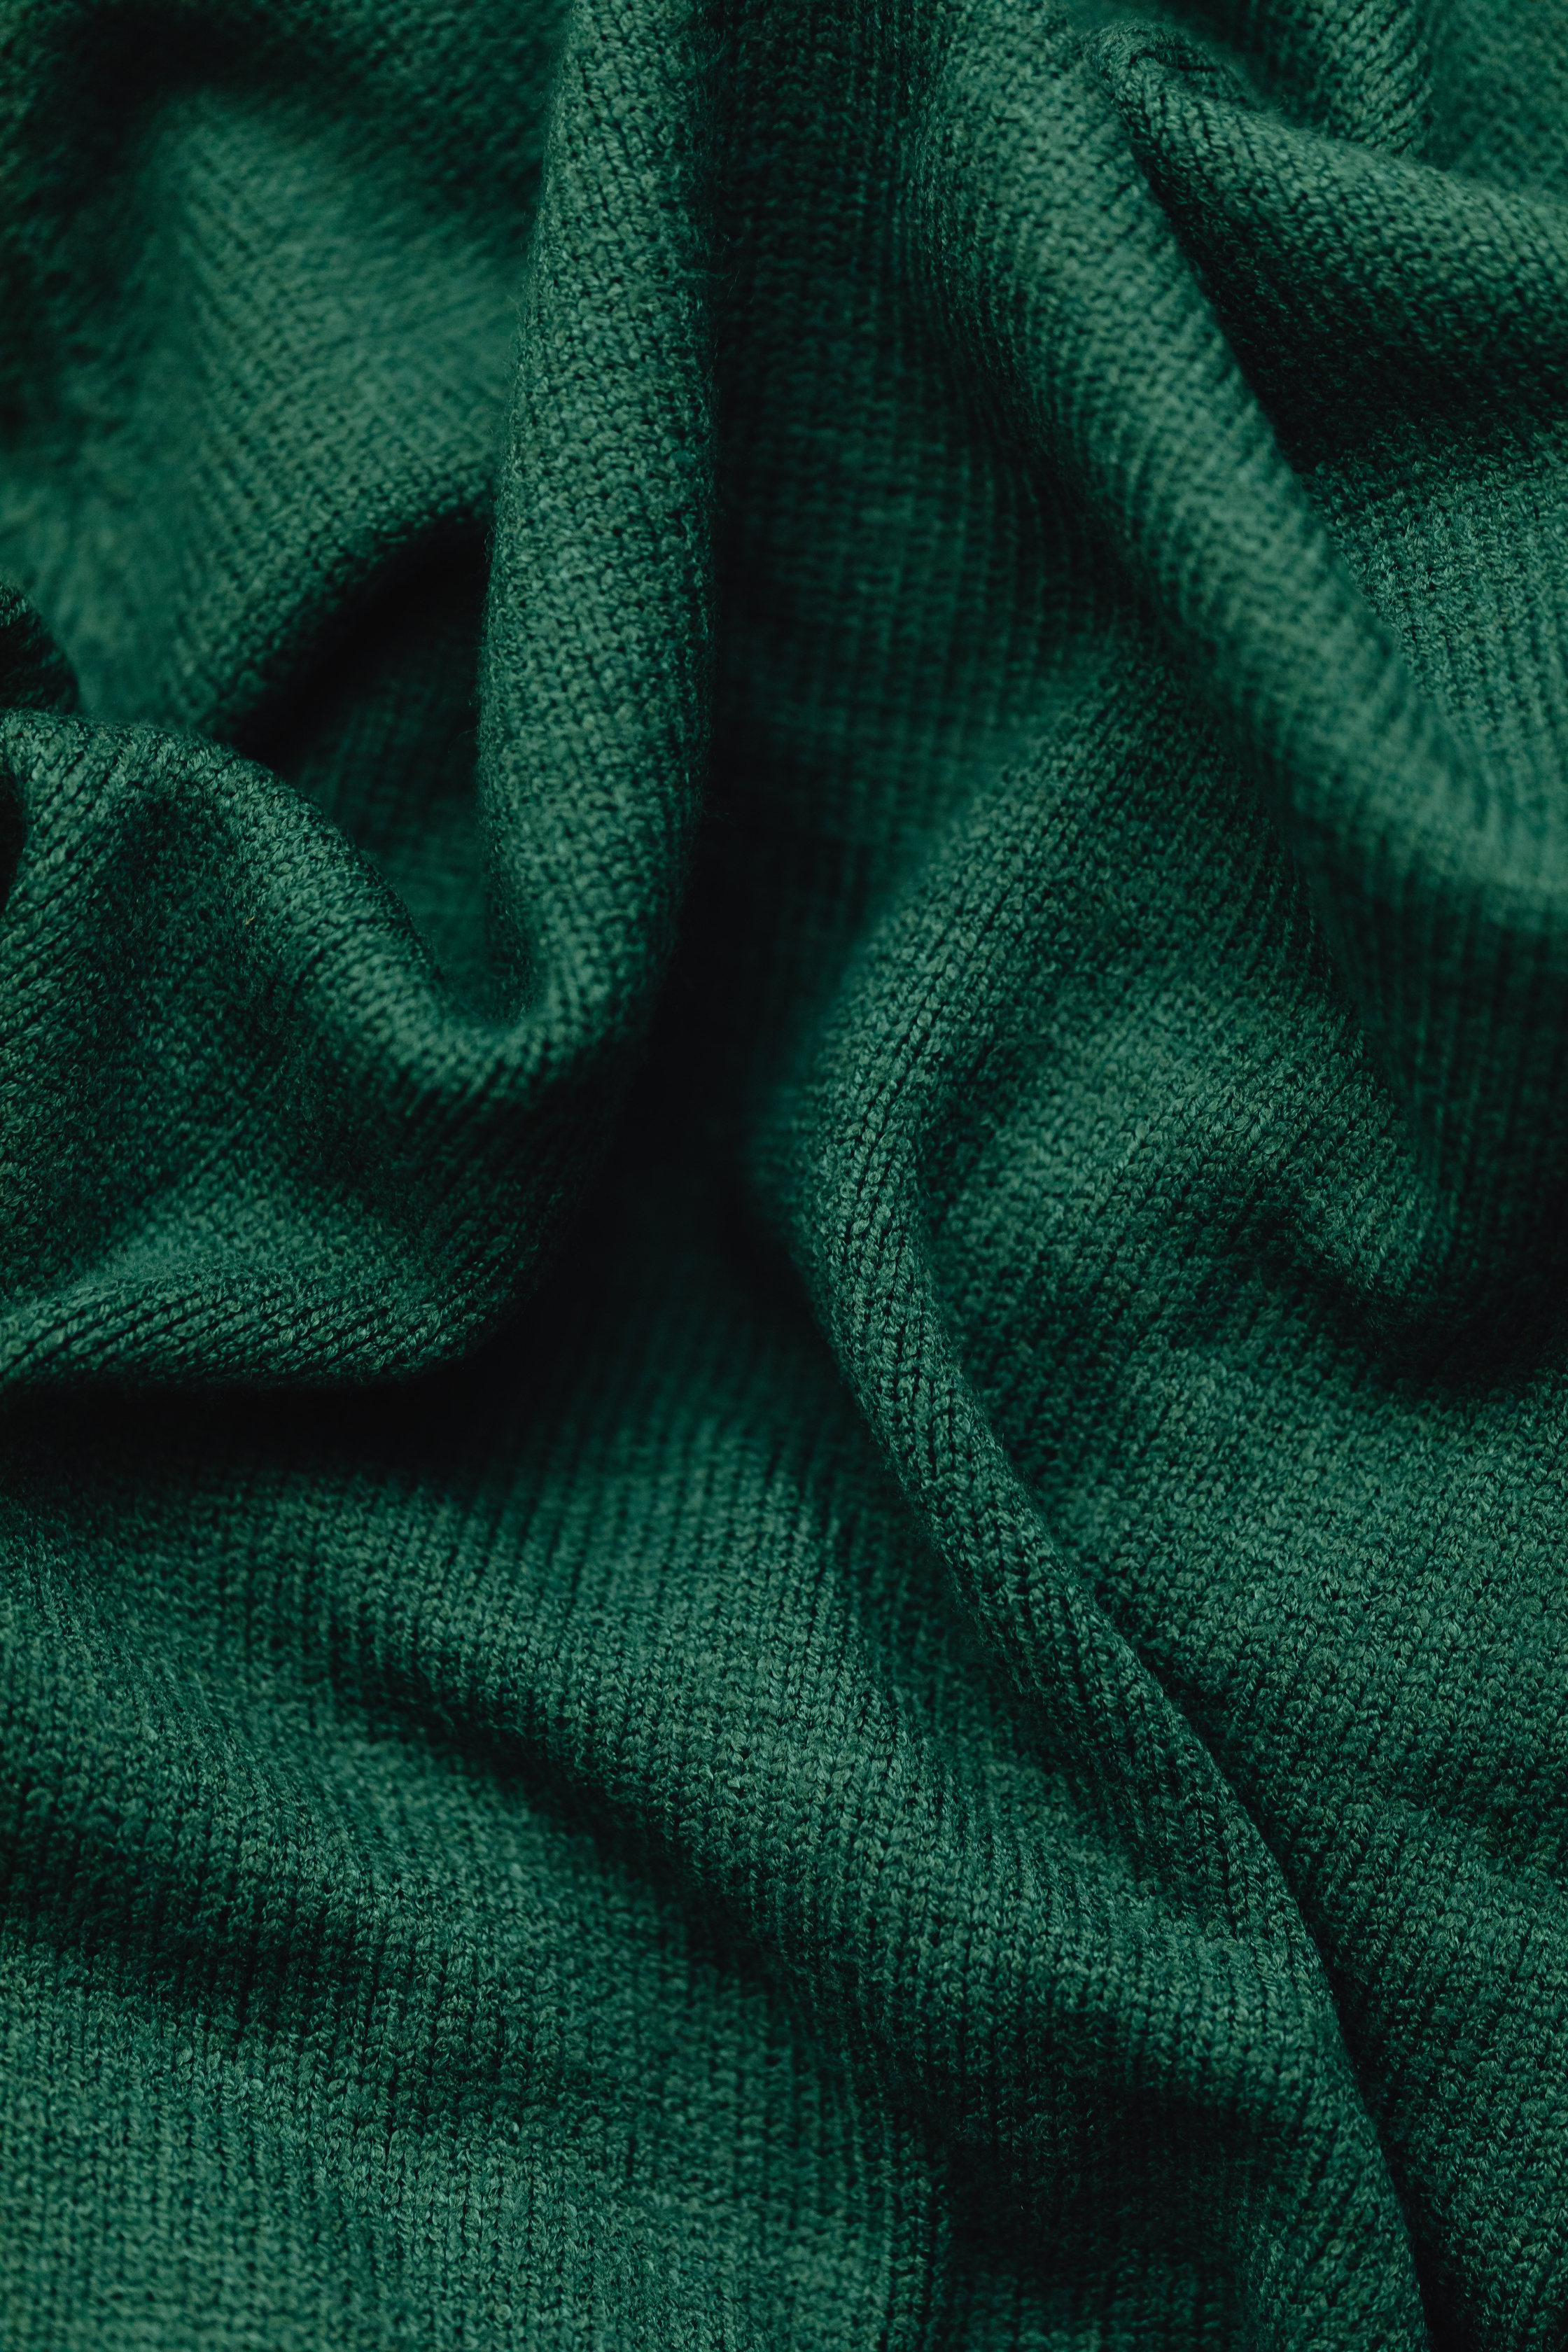 Green Textile in Close Up Image